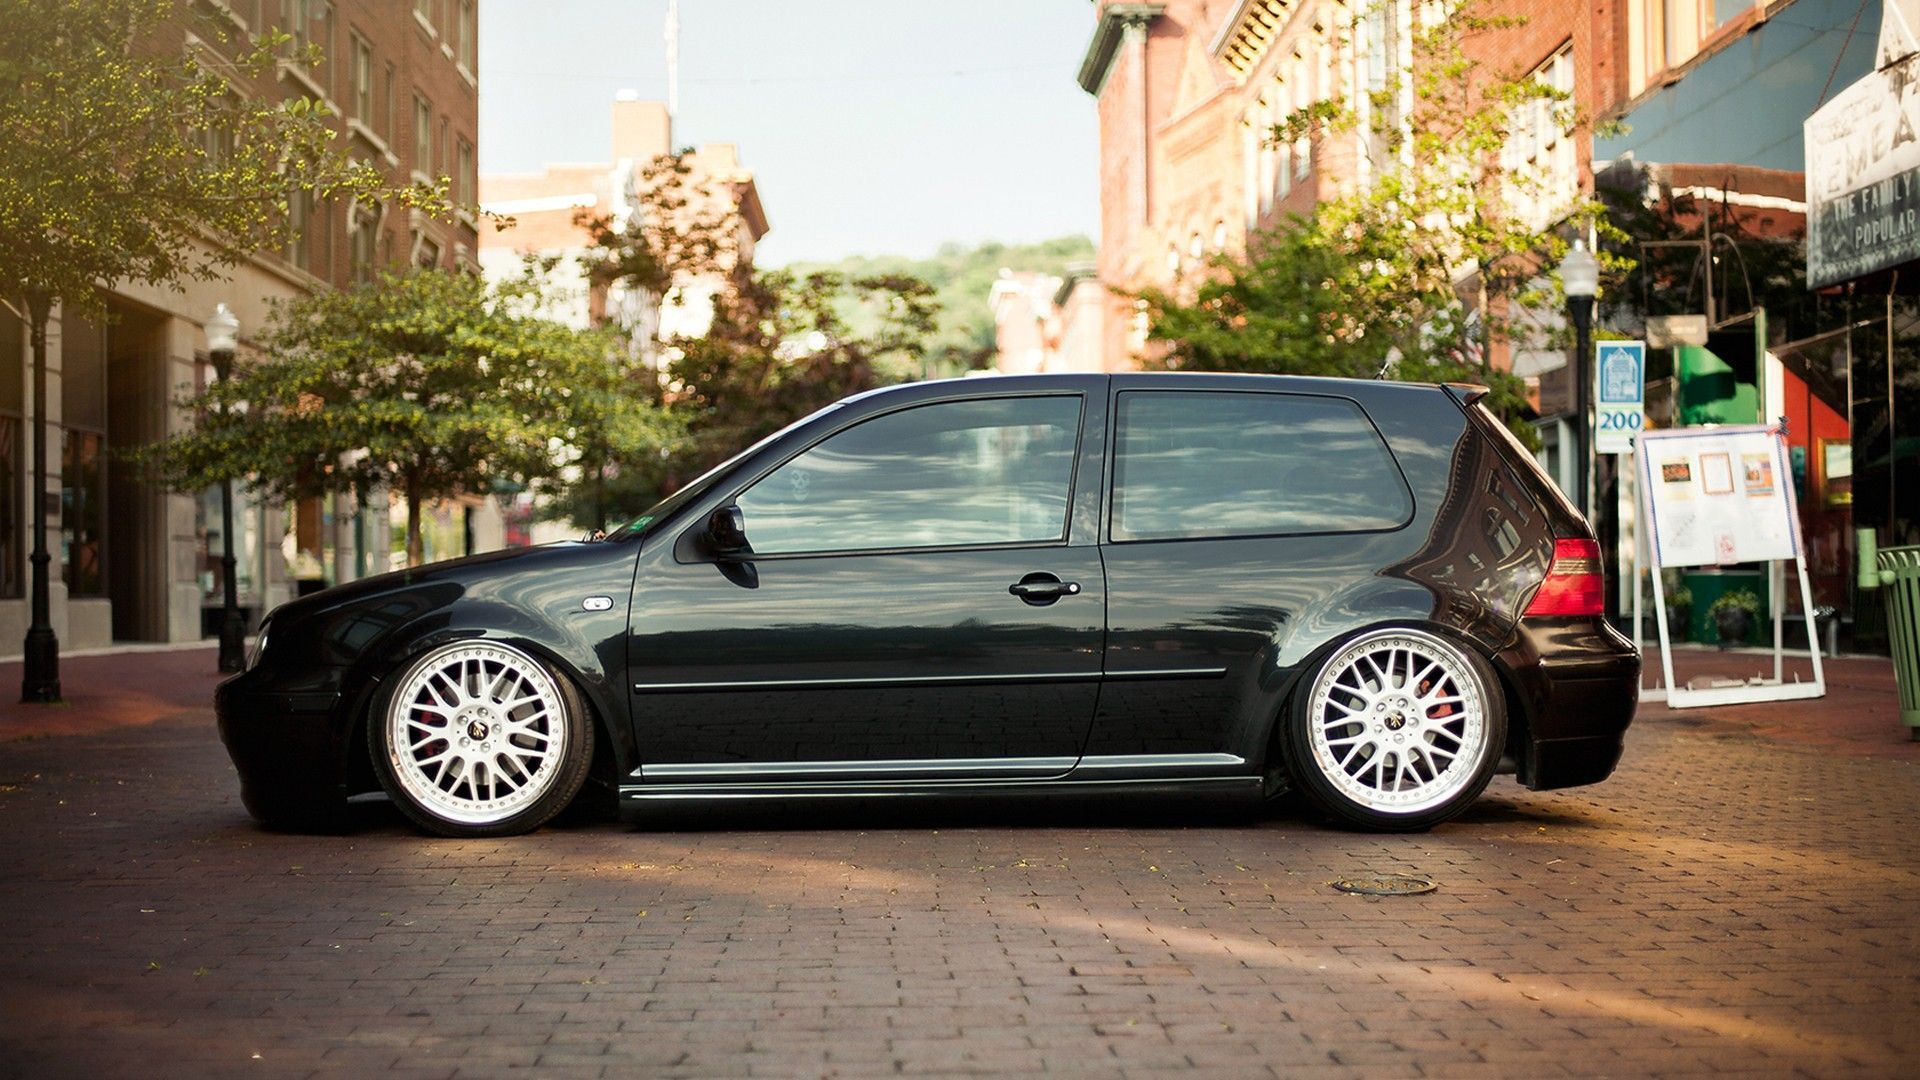 Cars Wallpaper Archives and Background. Vw golf